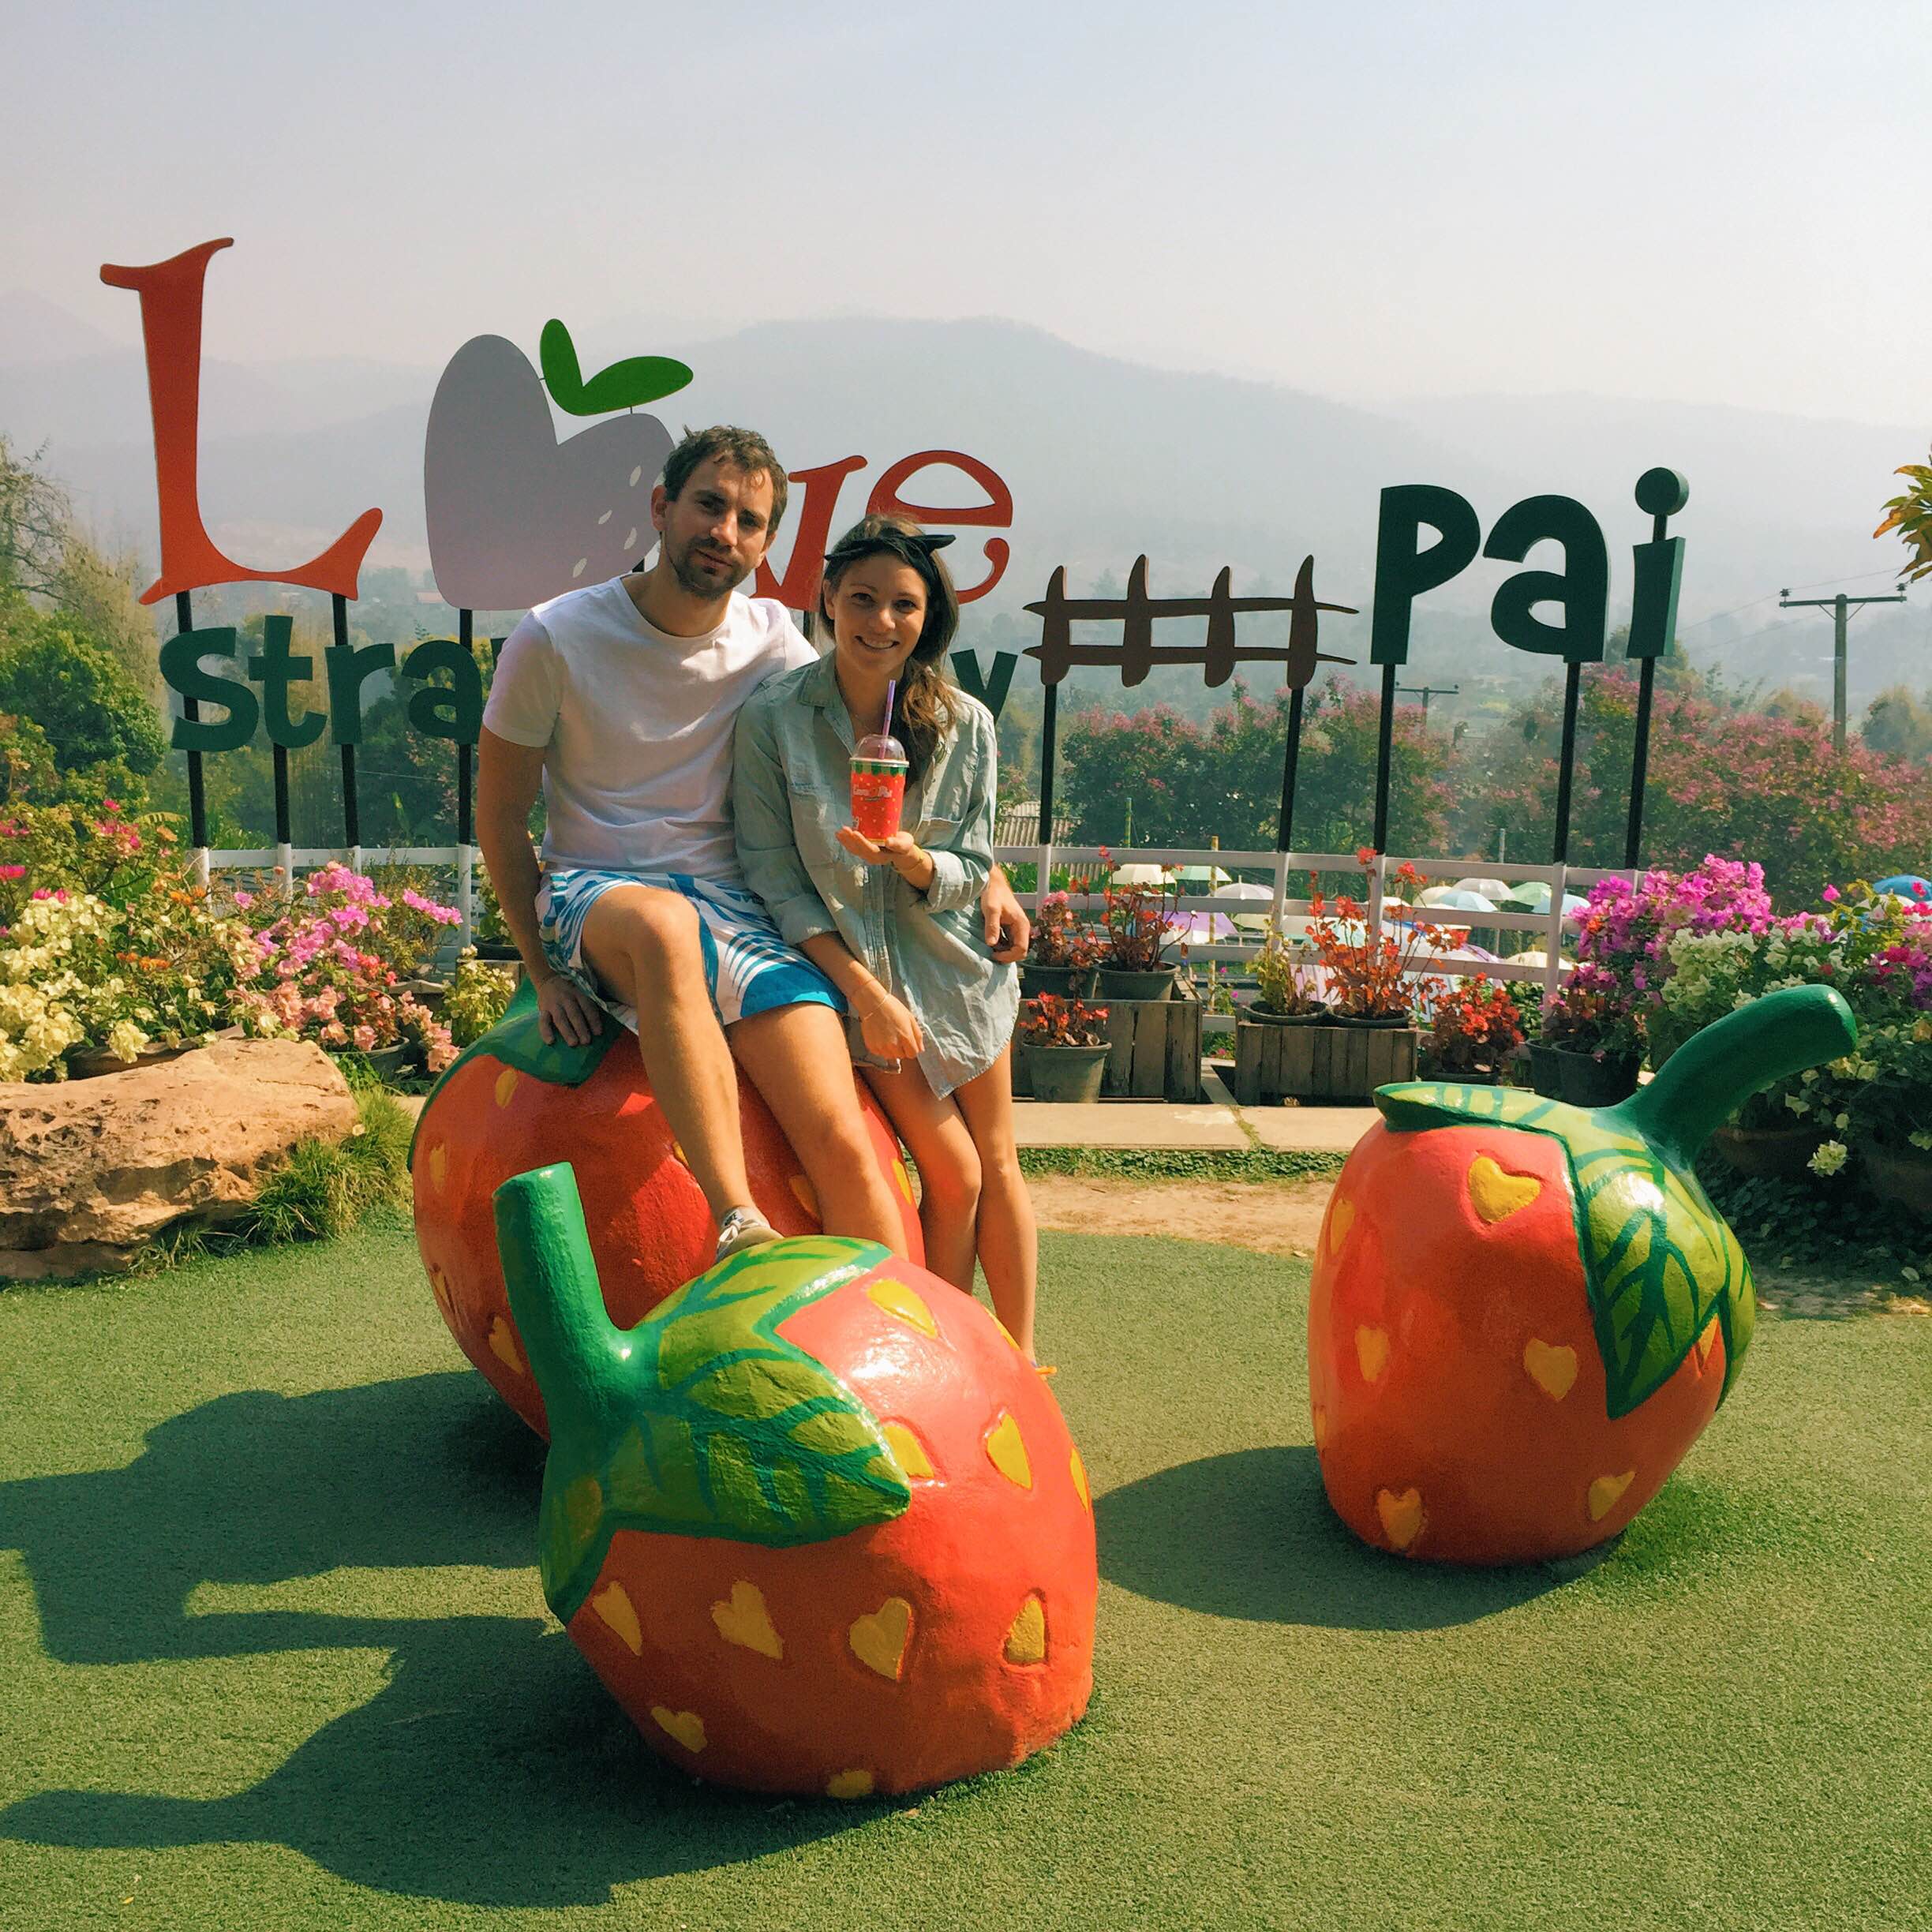 Love Strawberry Pai—the best setting for a photoshoot amid a strawberry themed theme park.